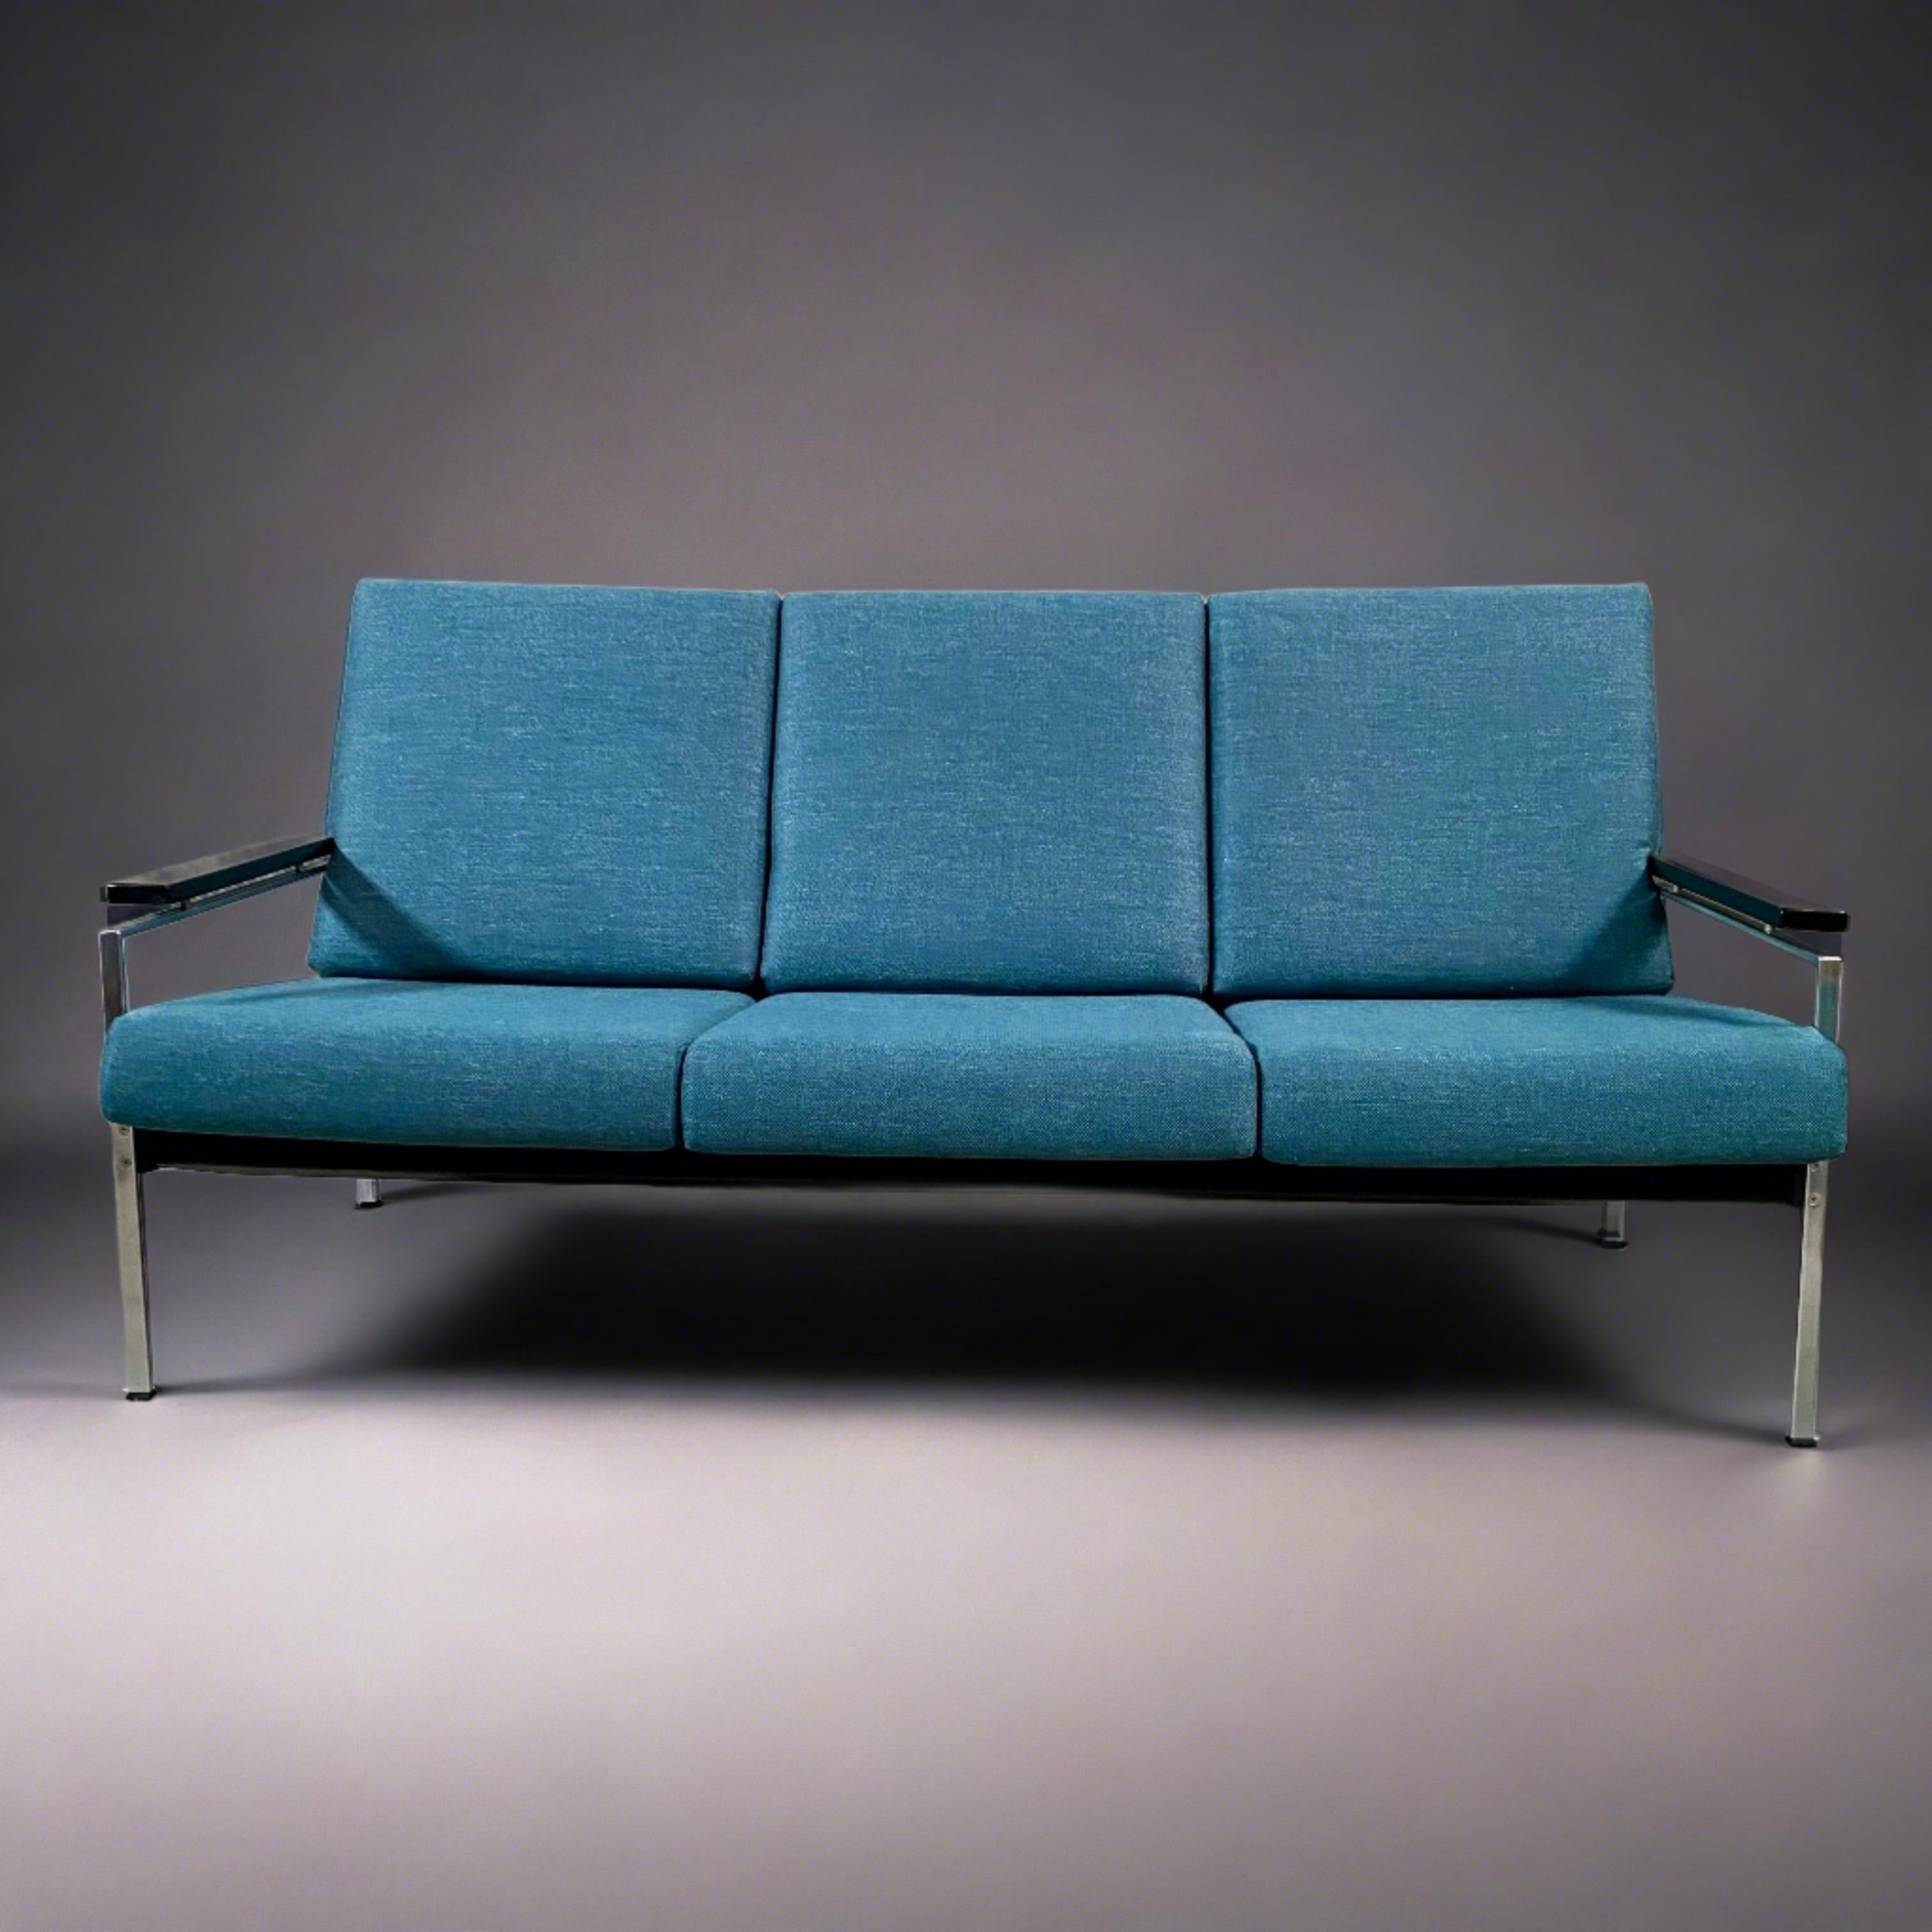 Mid-Century Modern 3-seater Sofa by Rob Parry for Gelderland, Netherlands 1970 For Sale